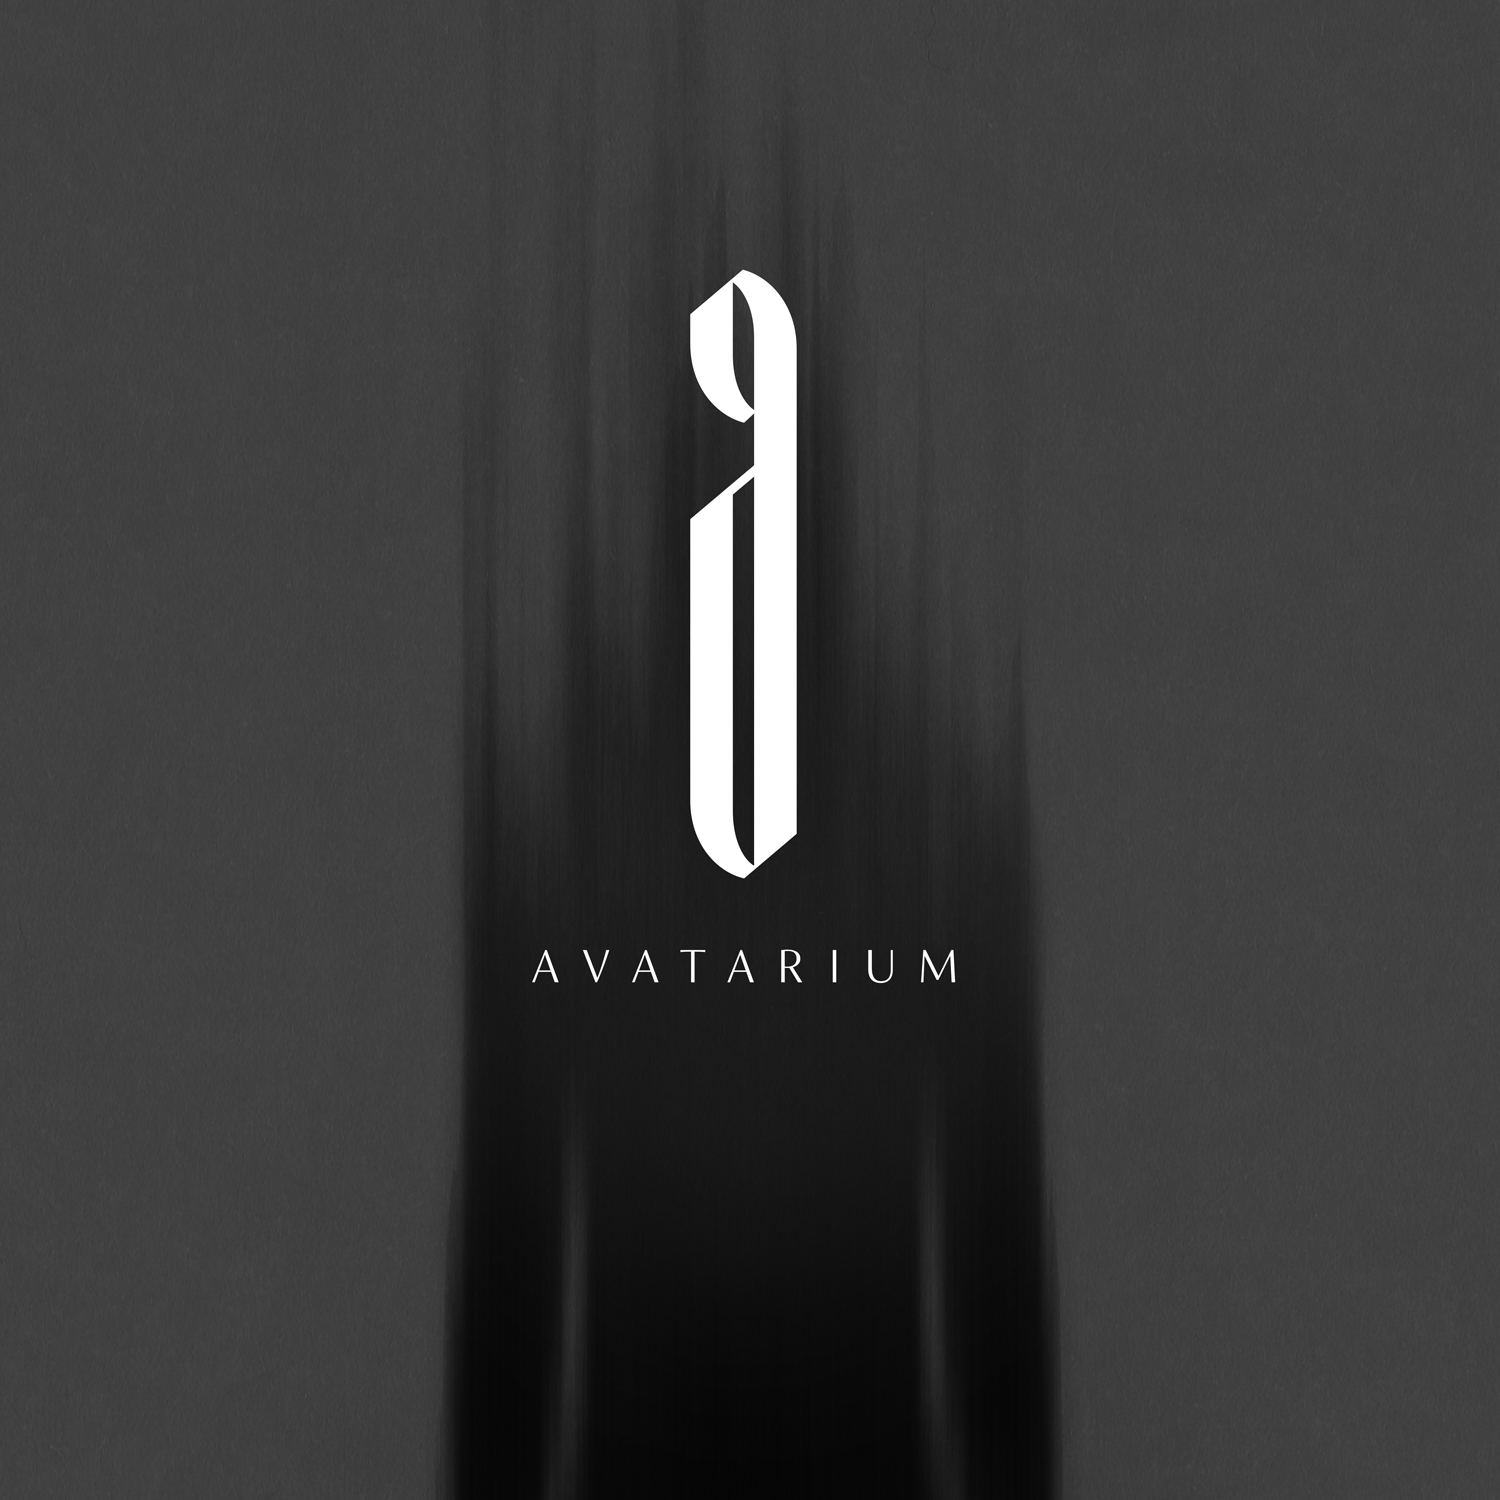 Avatarium (S) – The Fire I Long For